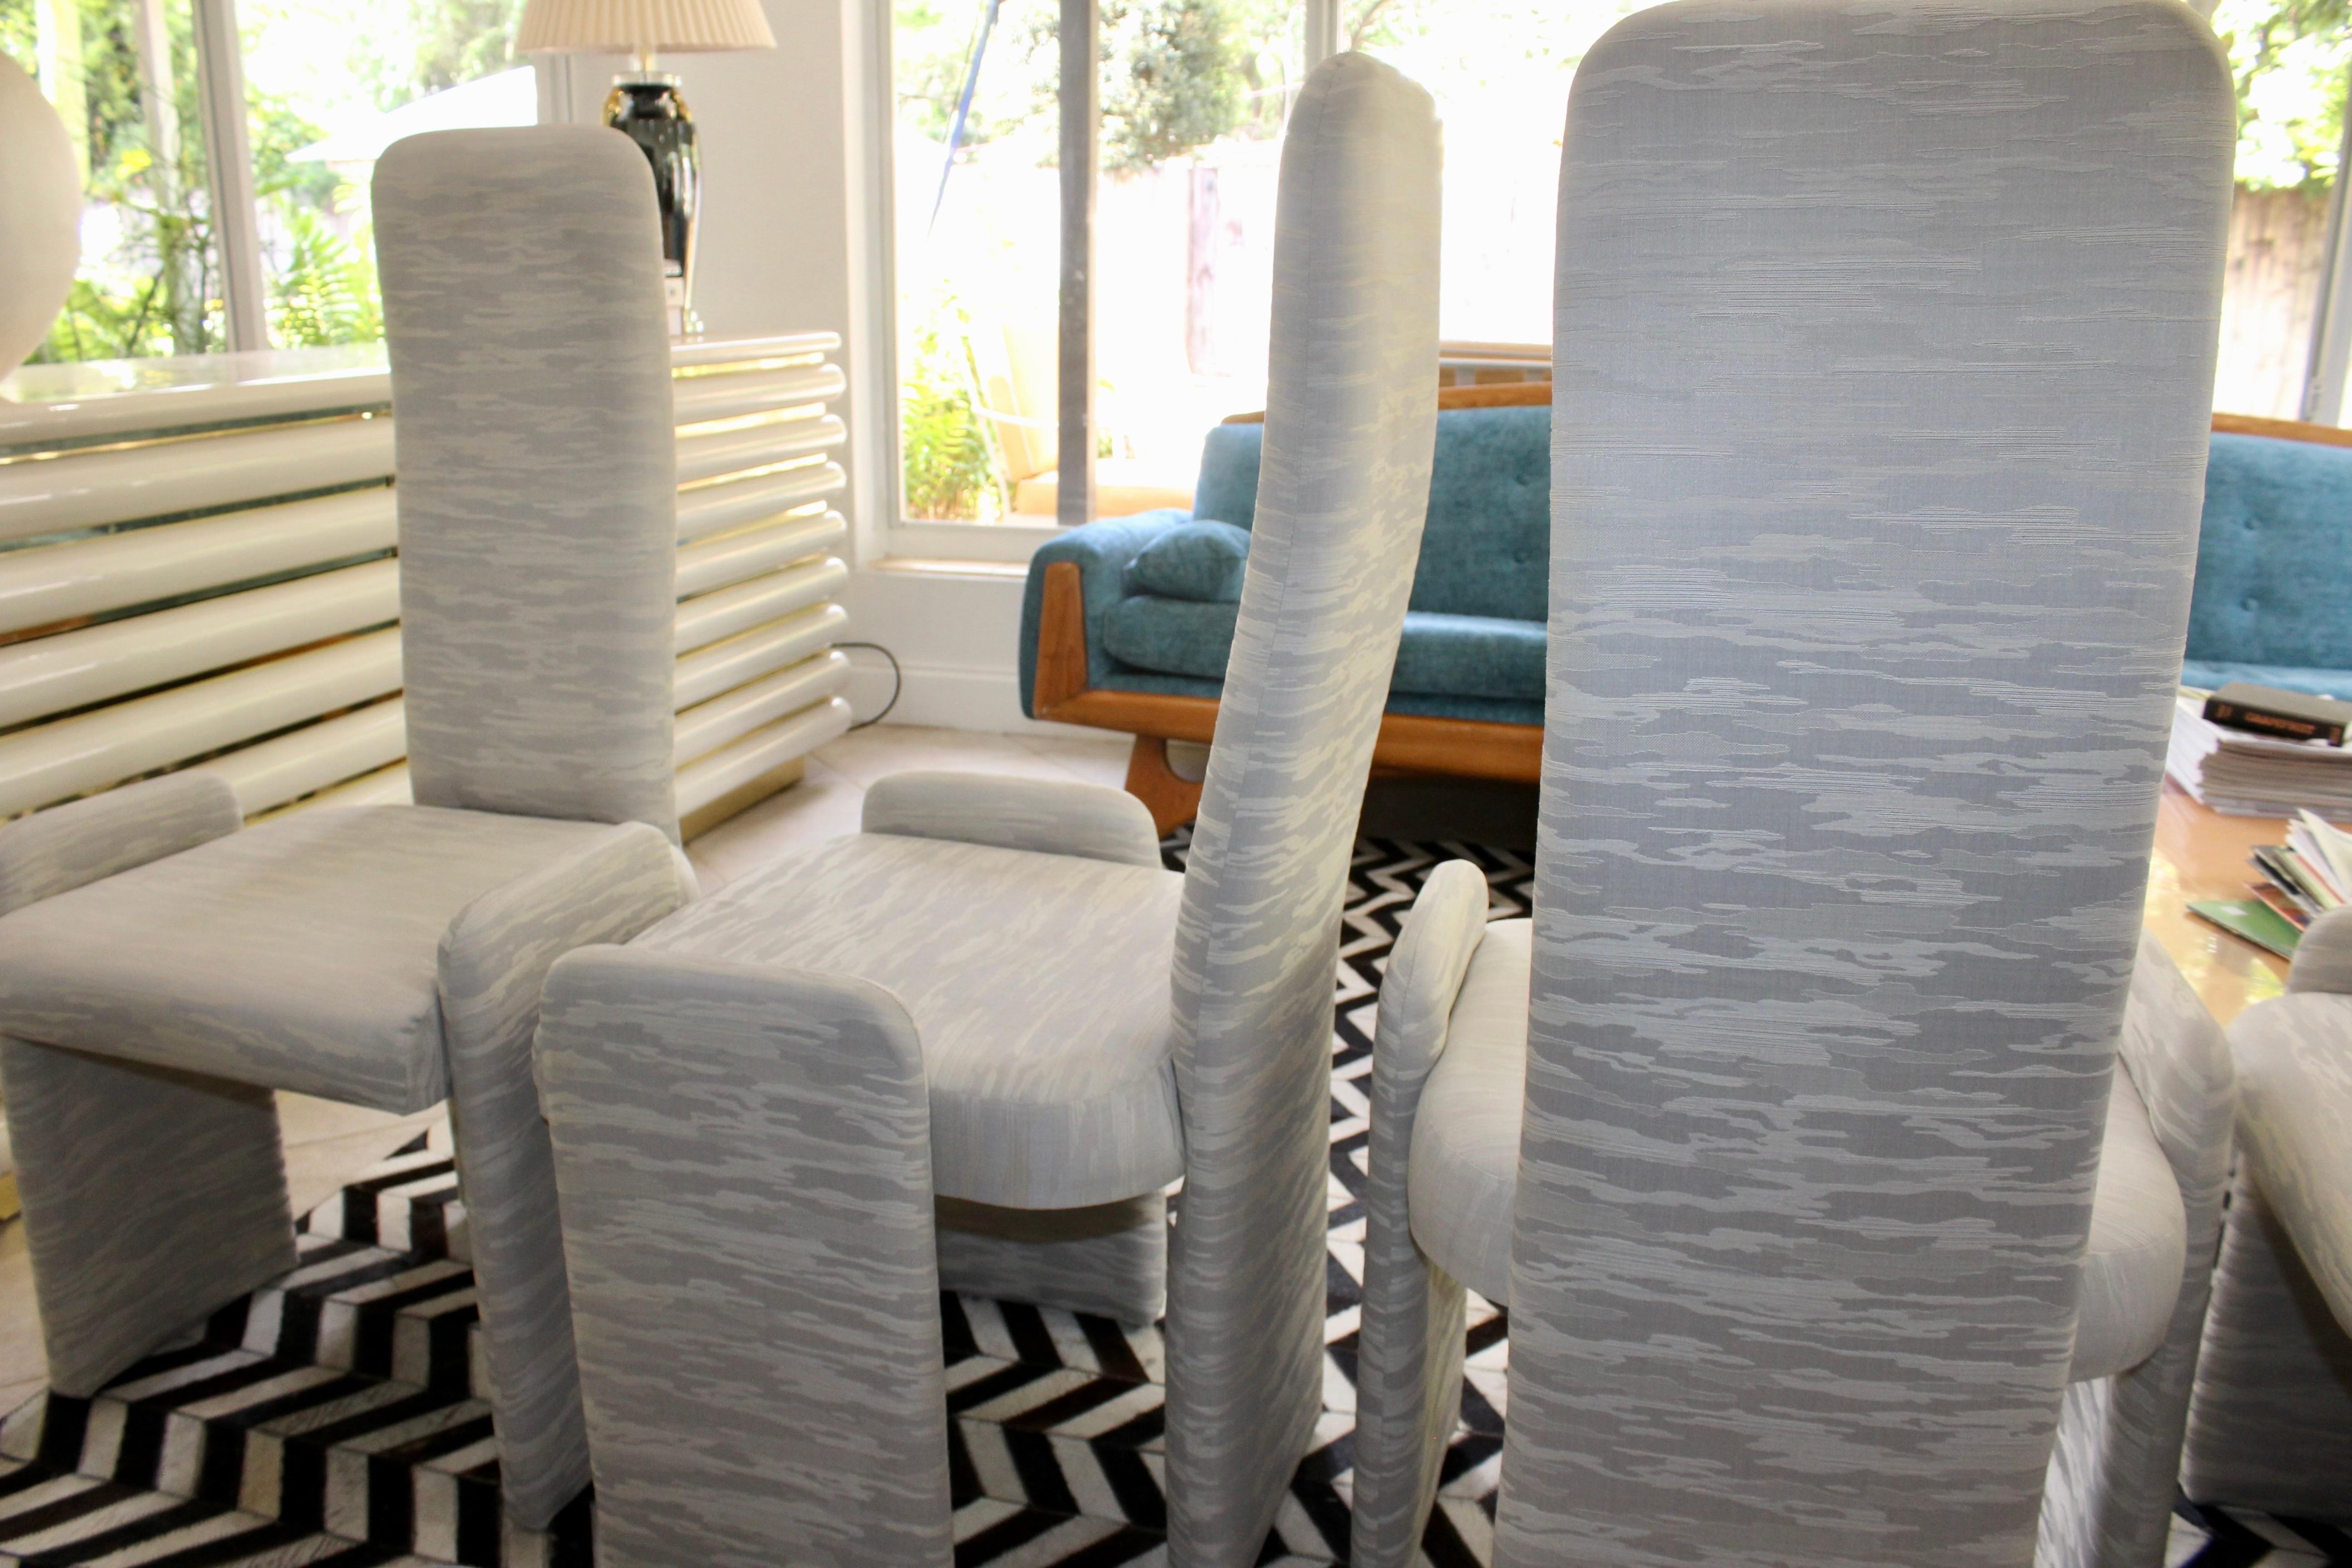 This set of four Italian dining chairs has a modernist sensibility that is interesting to view from all angles. Recently reupholstered and restored in modern white and gray striped fabric upholstery by precision furniture inc. Perfect for a